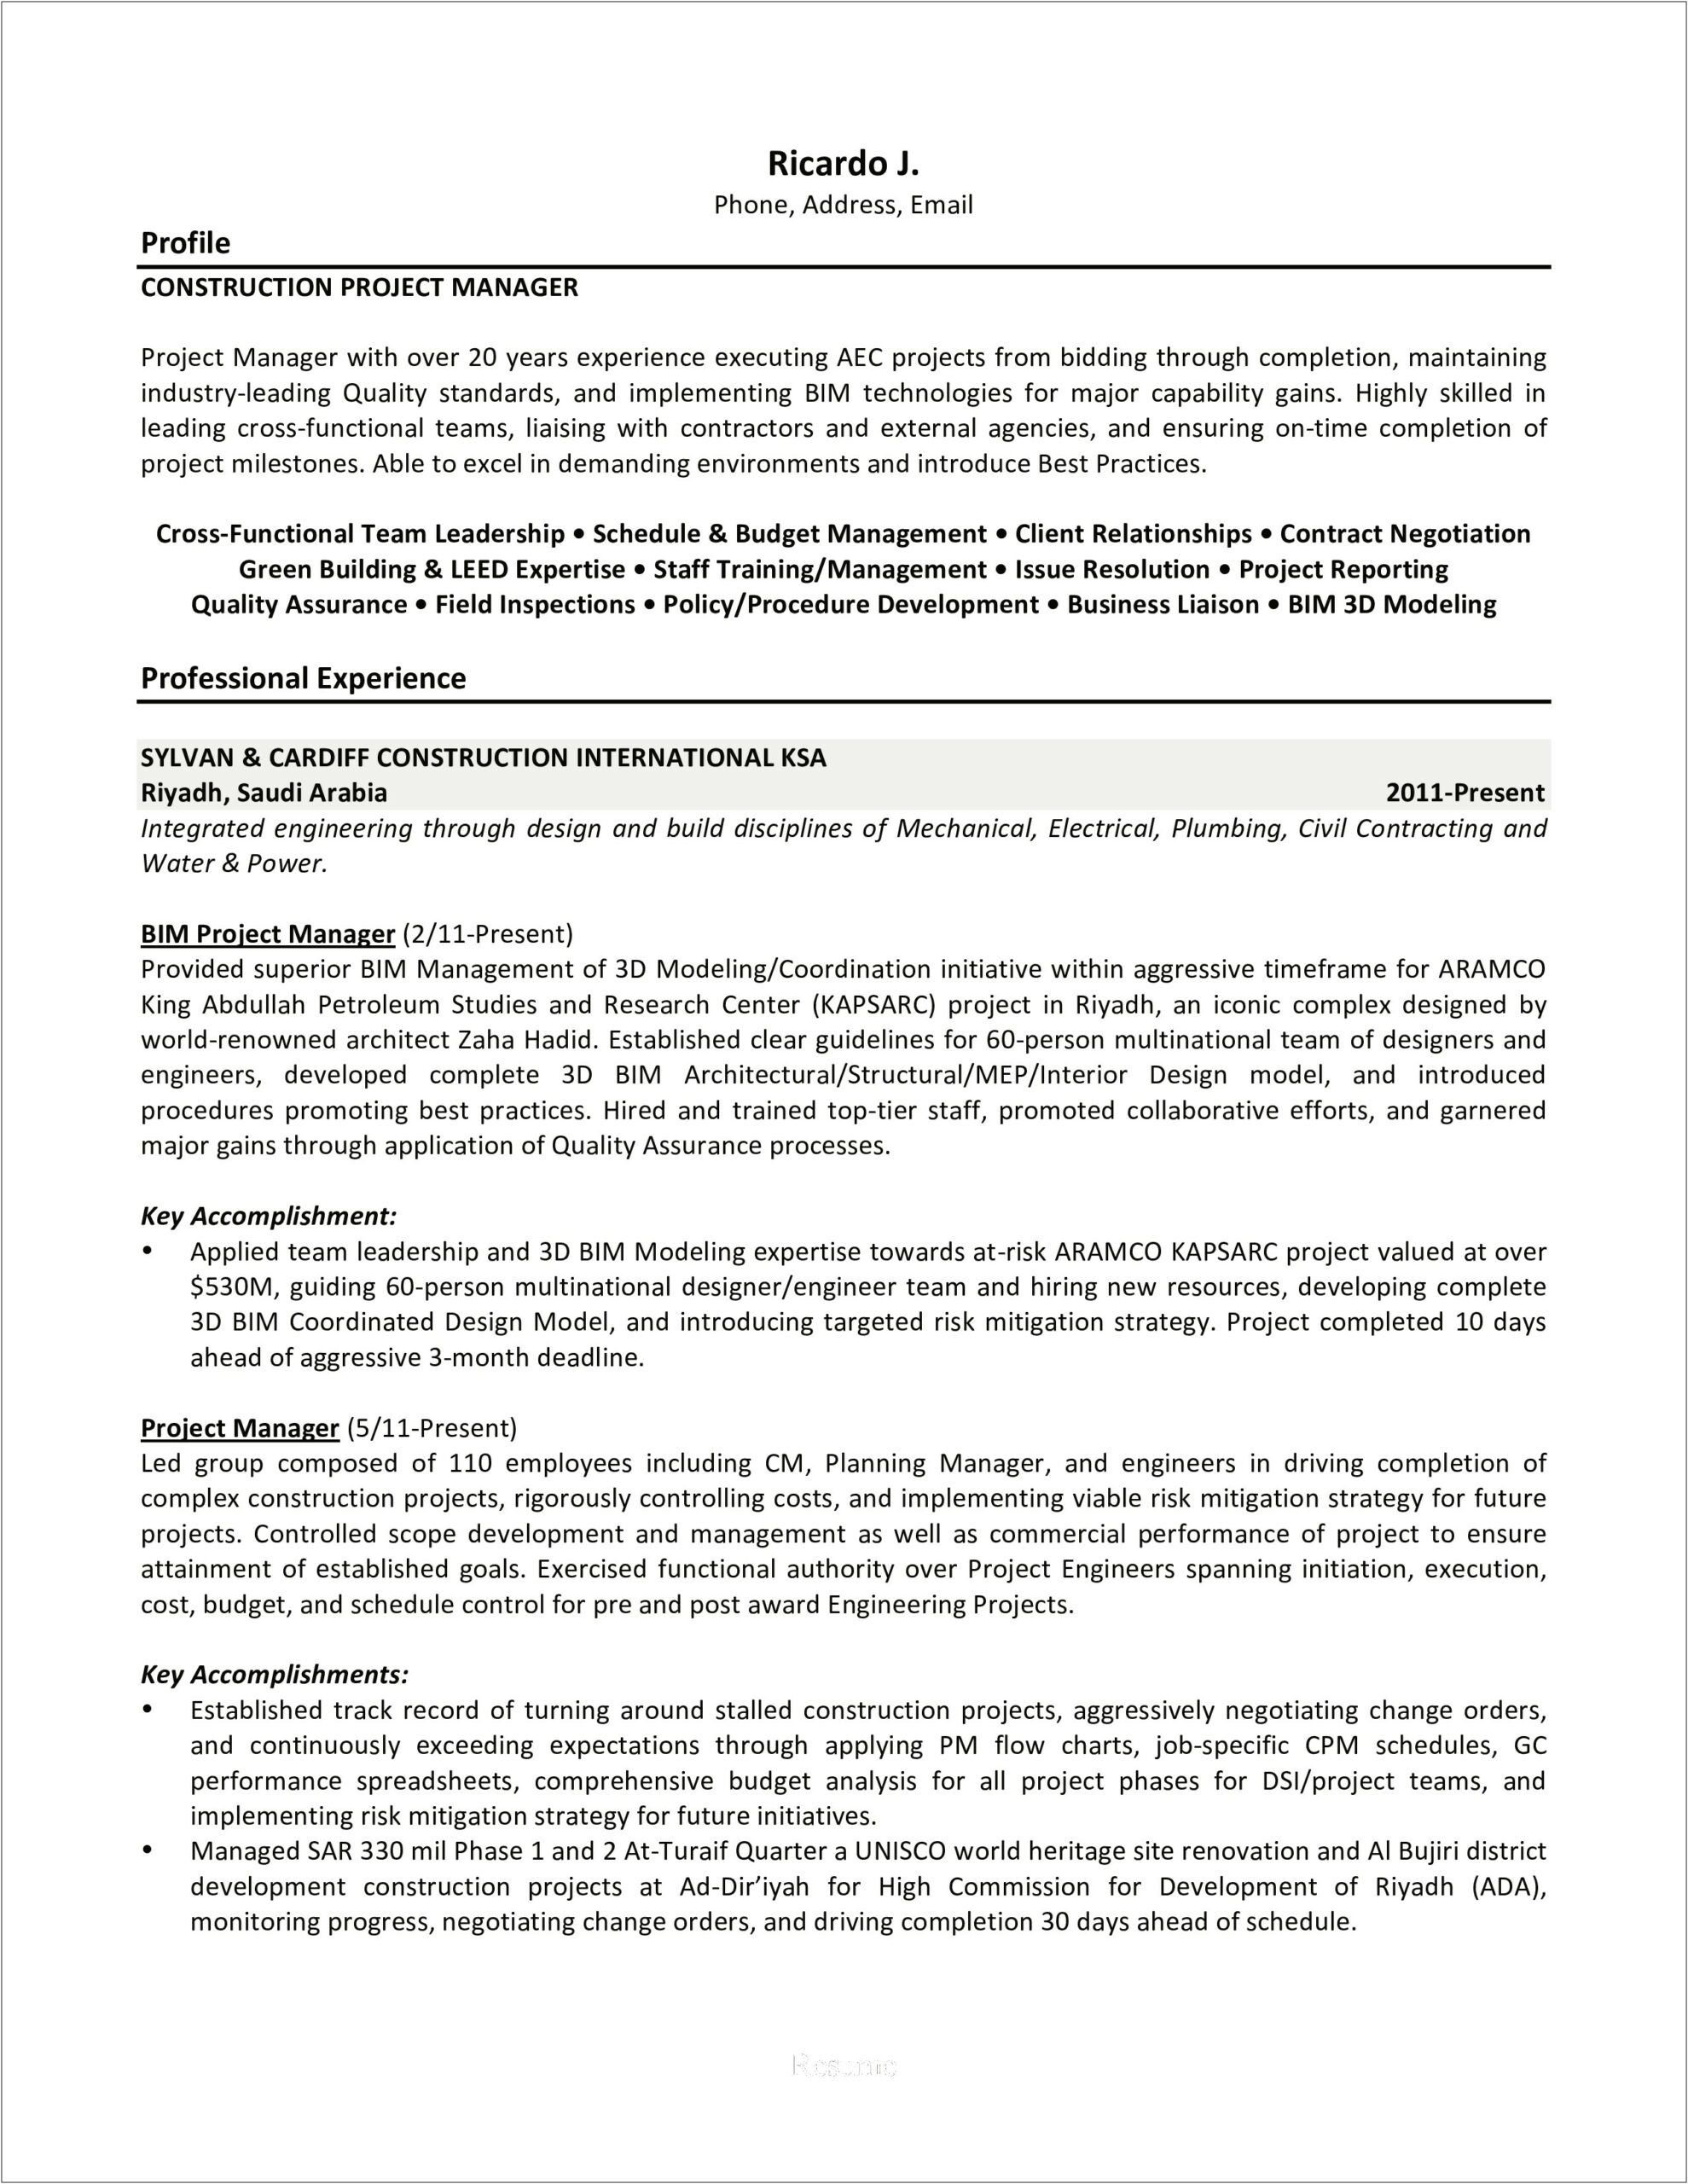 Resume The Perfect Risk Management Resume